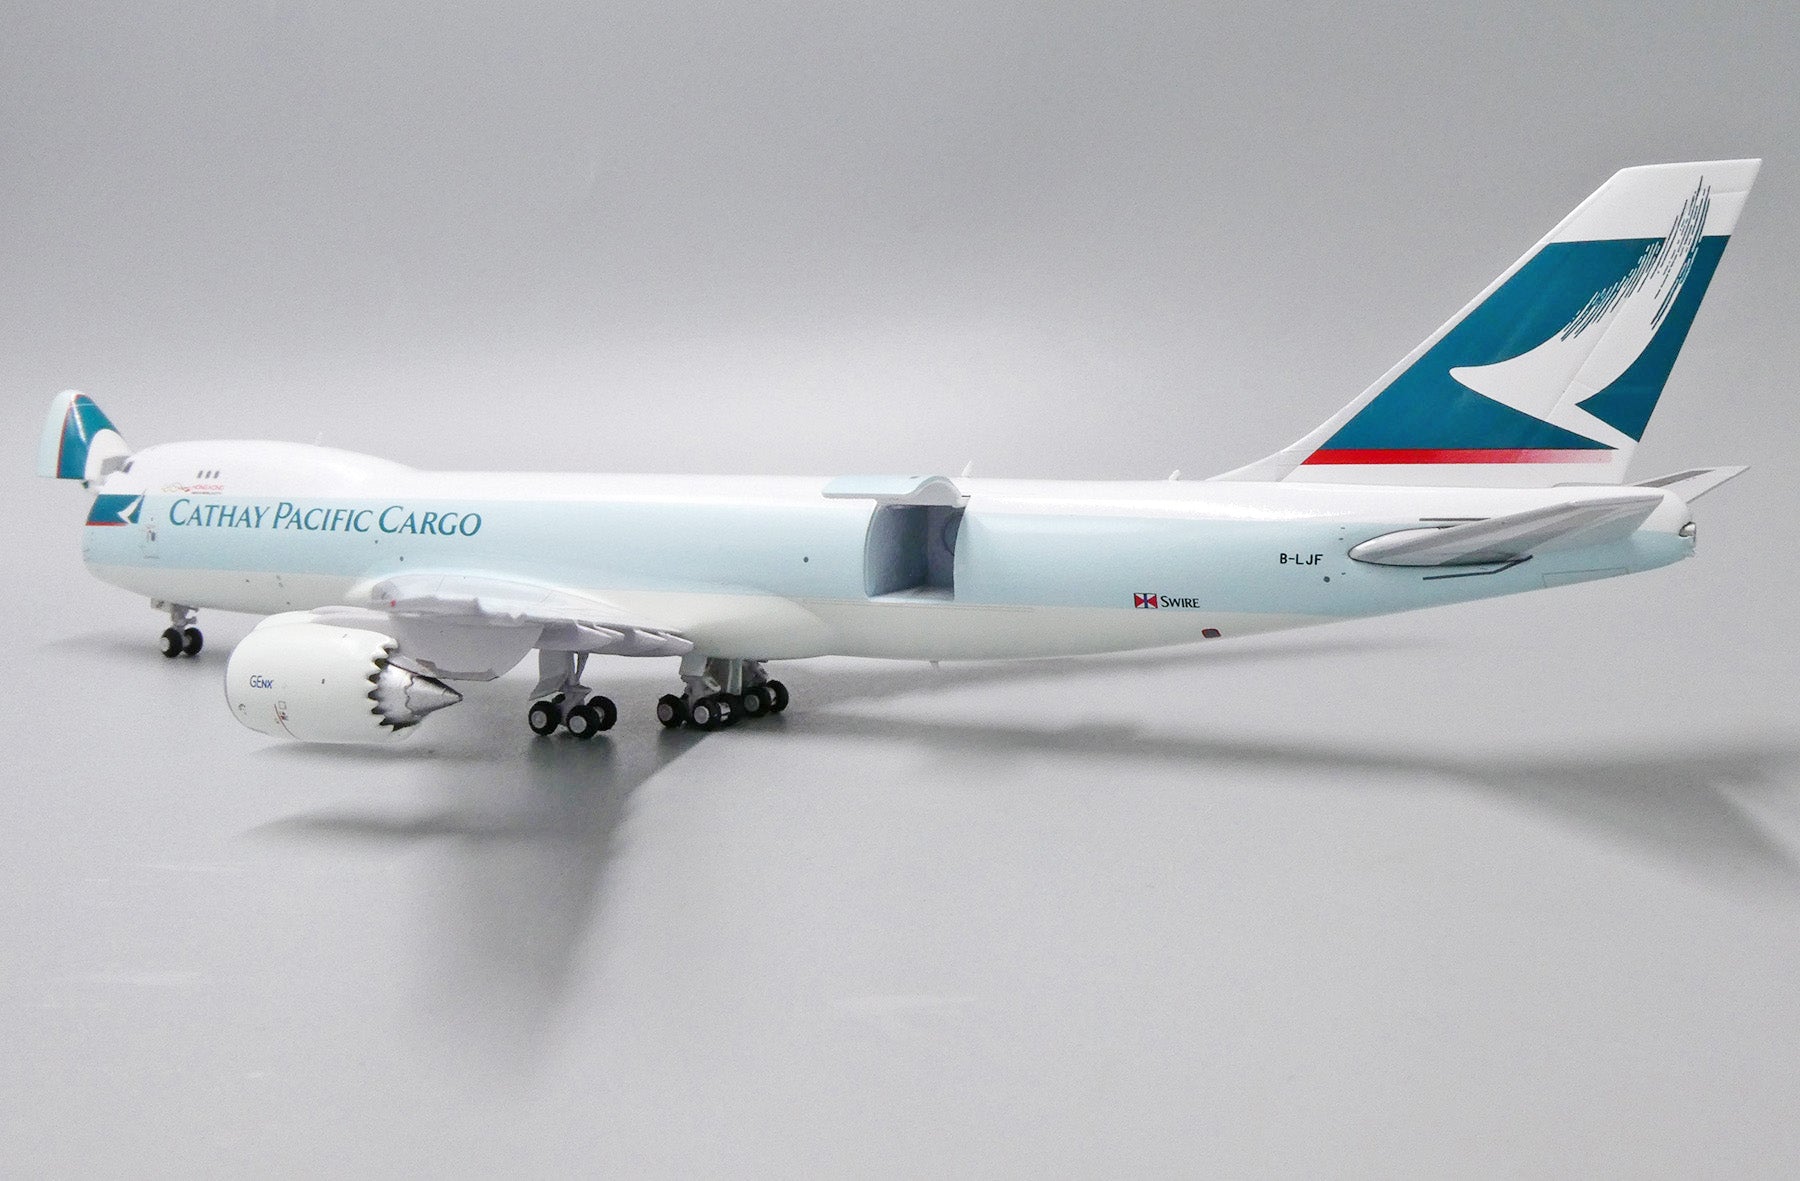 1:400 JC Wings Cathay Pacific Cargo 747-8F B-LJF 